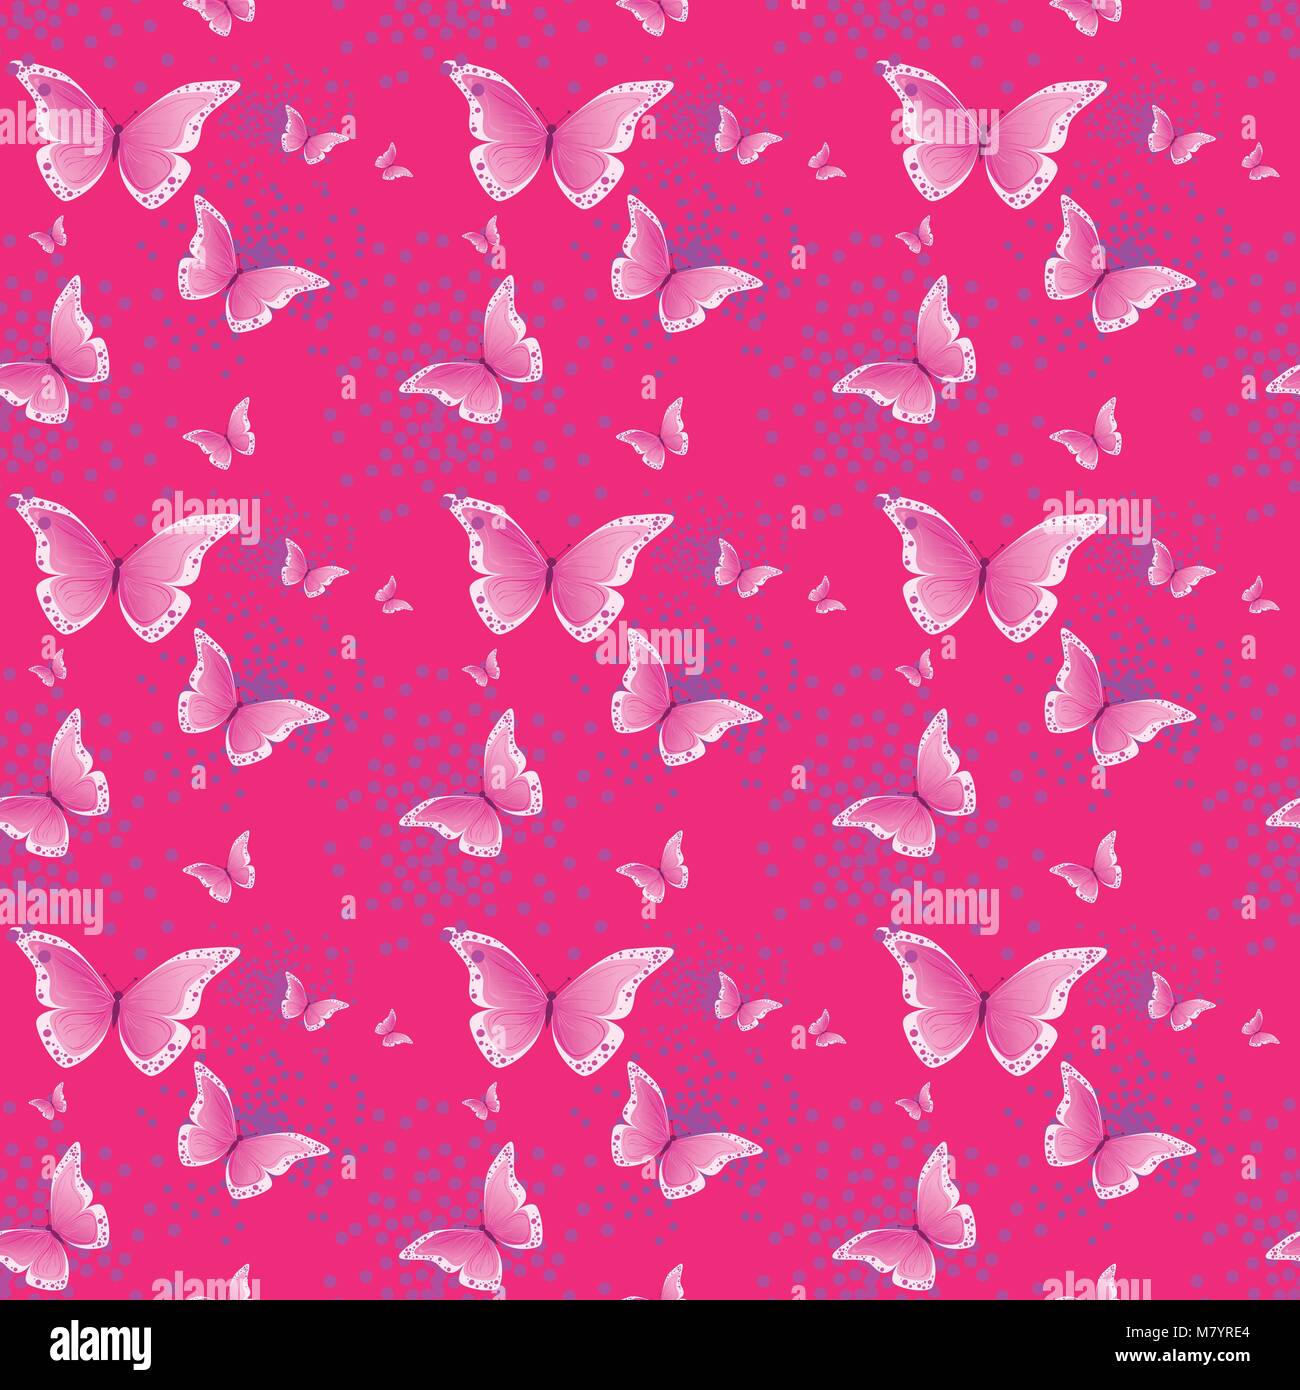 Cute Pink Butterfly Wallpapers  Top Free Cute Pink Butterfly Backgrounds   WallpaperAccess